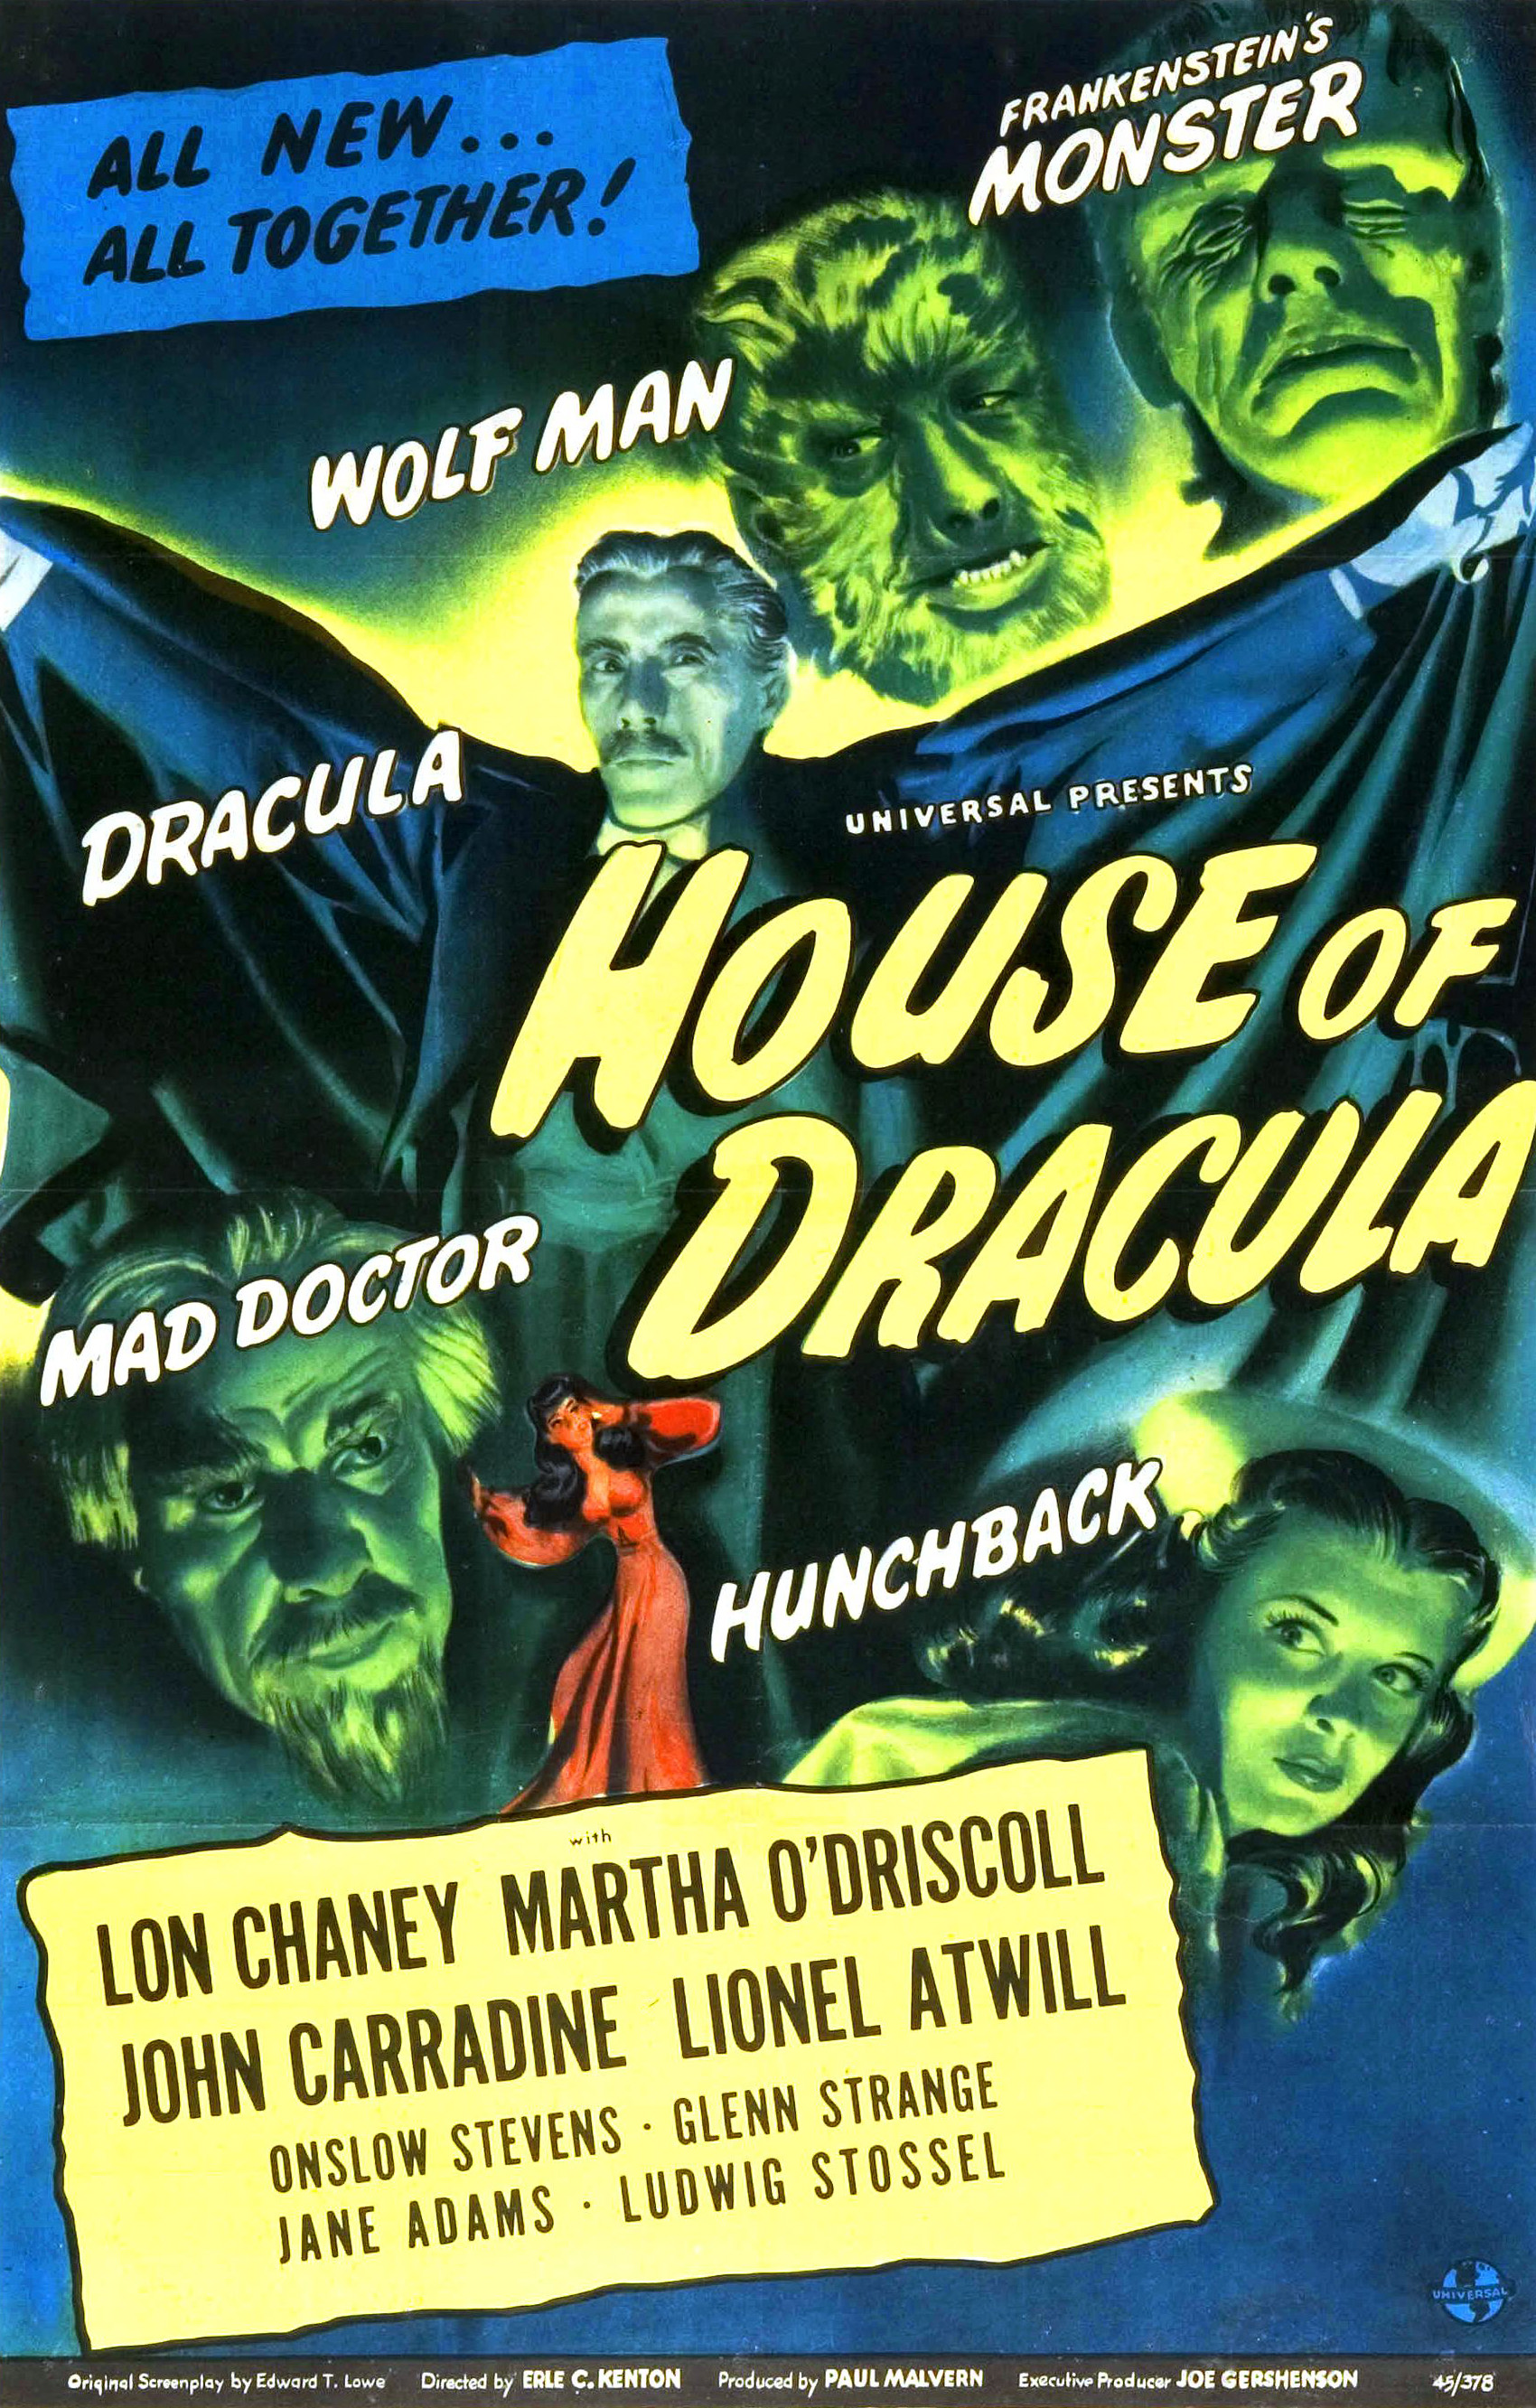 Jane Adams as the 'hunchback' Nina (bottom right) and Onslow Stevens as the 'mad' Dr. Edelmann (bottom left) on a poster for <i>House of Dracula</i> (1945)